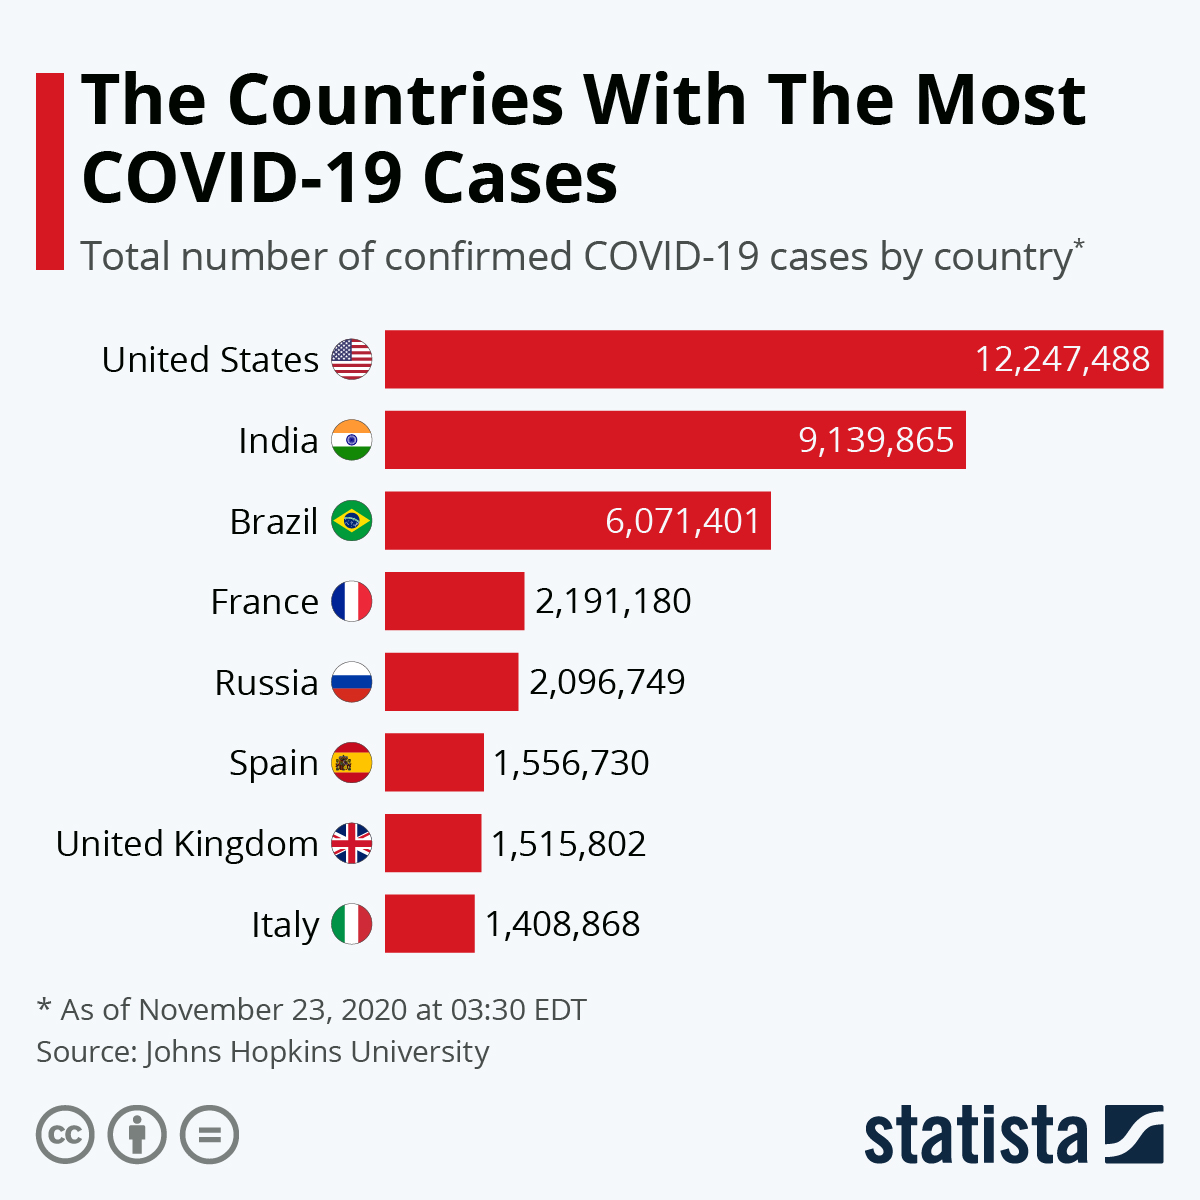 The Countries with the Most COVID-19 Cases